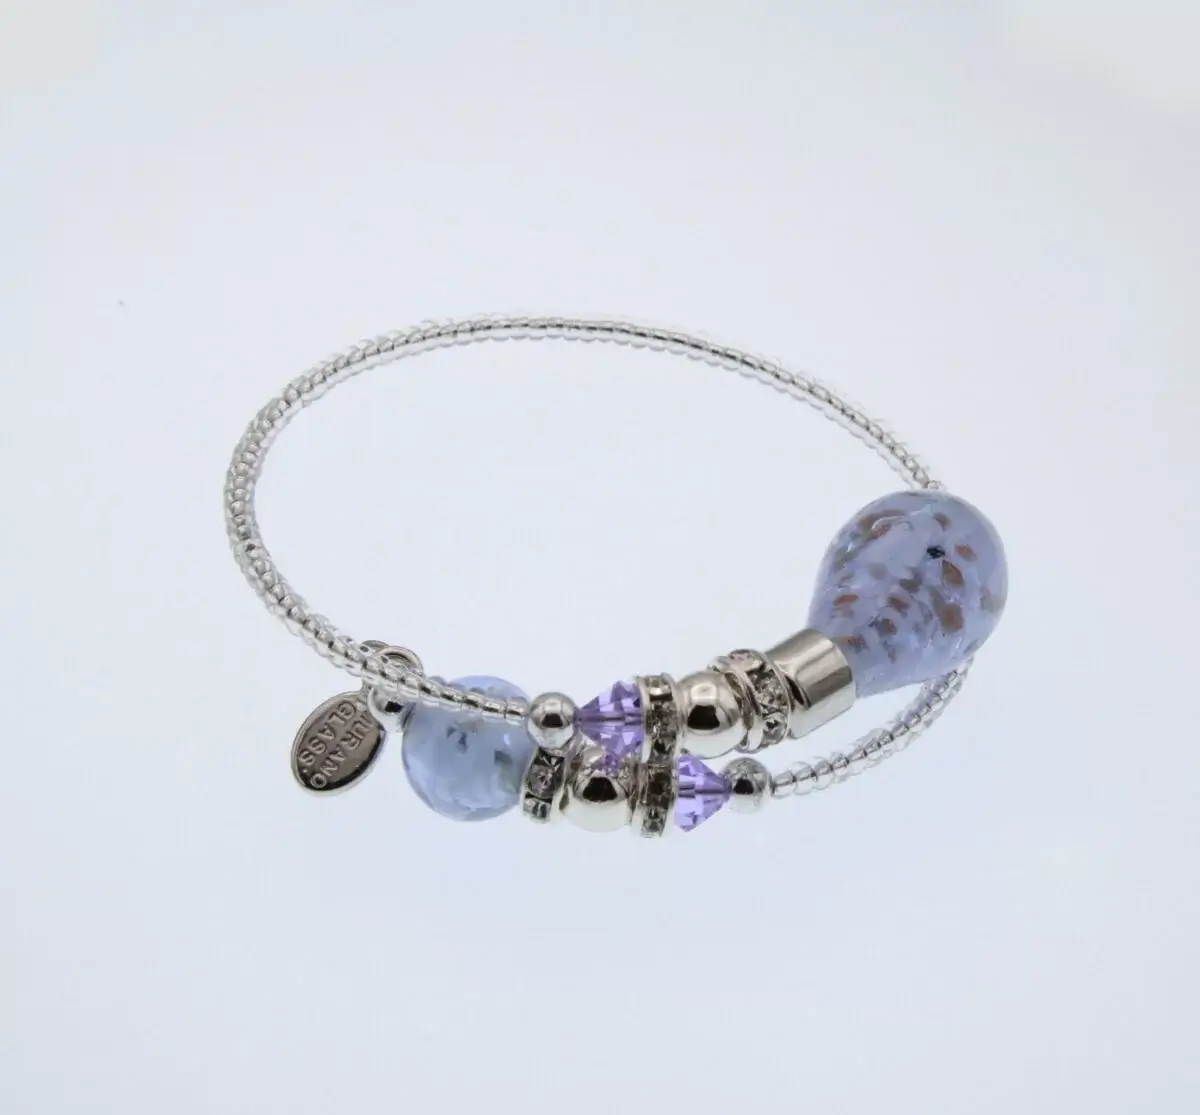 wrap bracelet with glowing lavender large Murano glass beads at its ends, silver seed beads and mini bling add sparkls